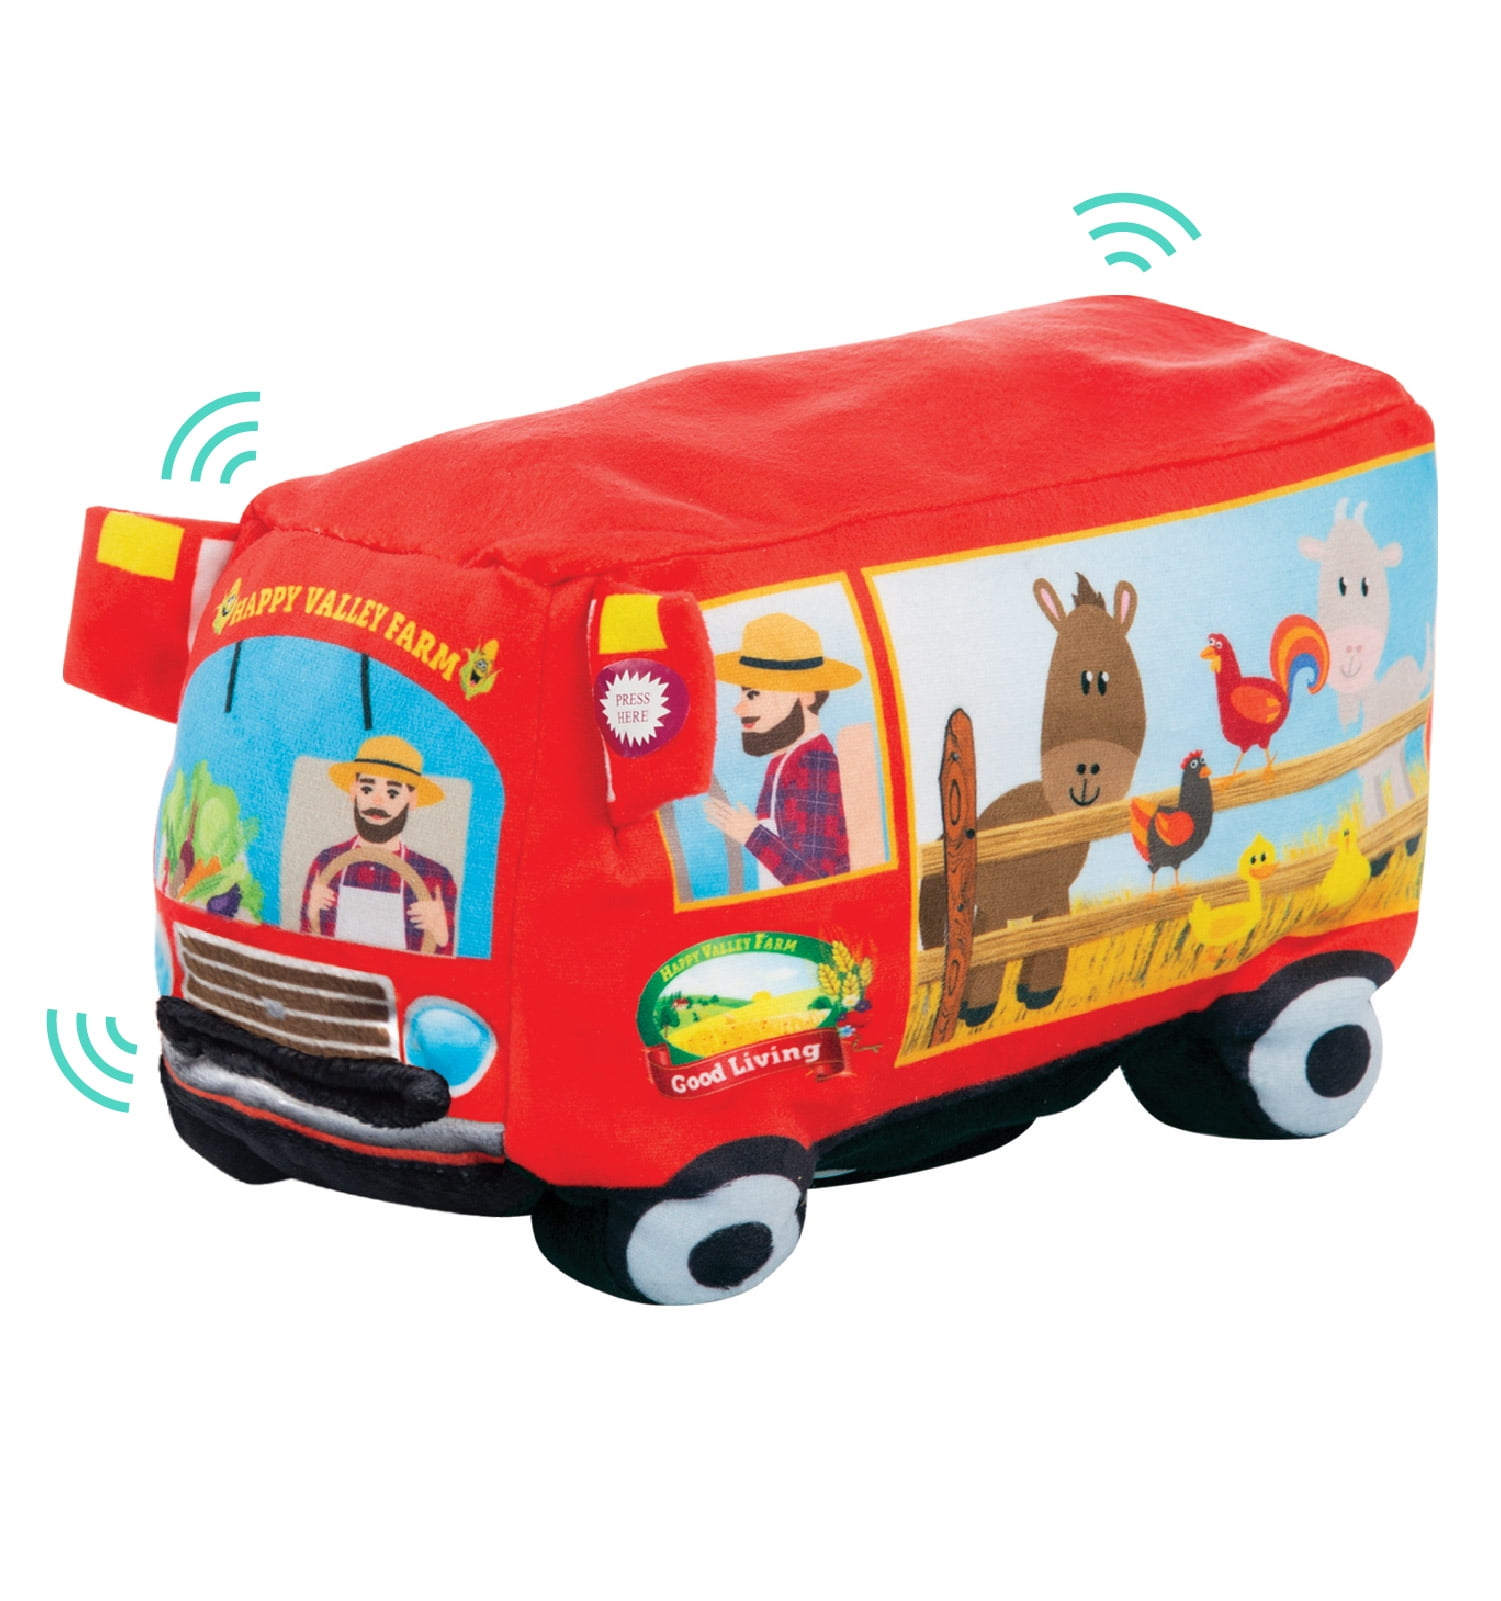 Etna Plush Singing Old MacDonald Had A Farm Toy – This Sing Along Farm  Truck Plays Old MacDonald – Dances and Lights Up to the Music – Fun Toys  For 